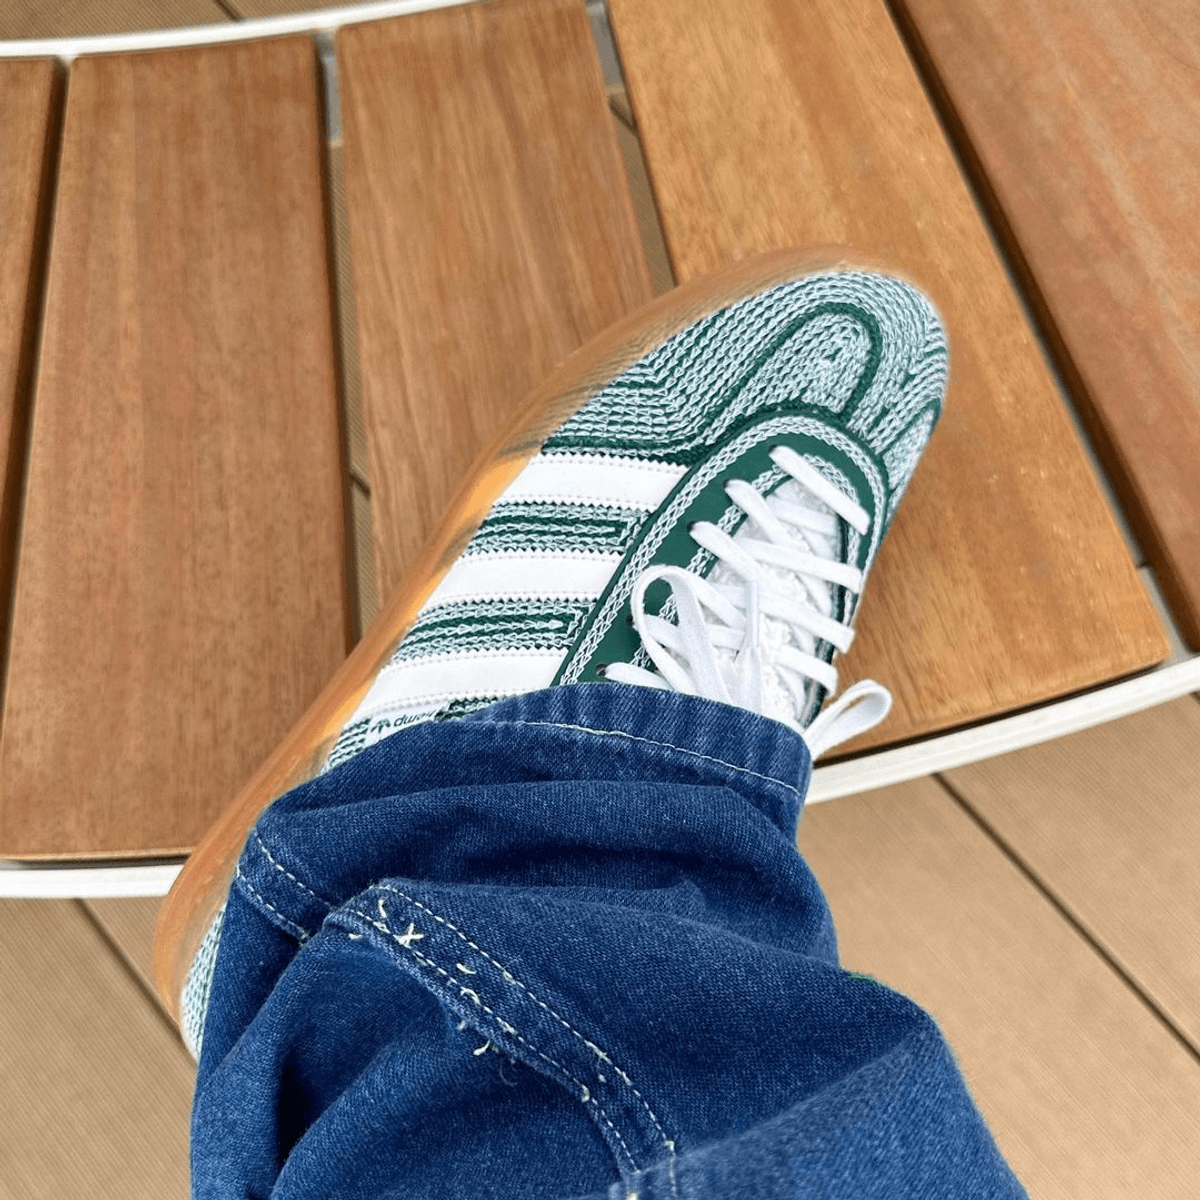 Sean Wotherspoon Shares A Close Look At The Upcoming Adidas Gazelle Hemp